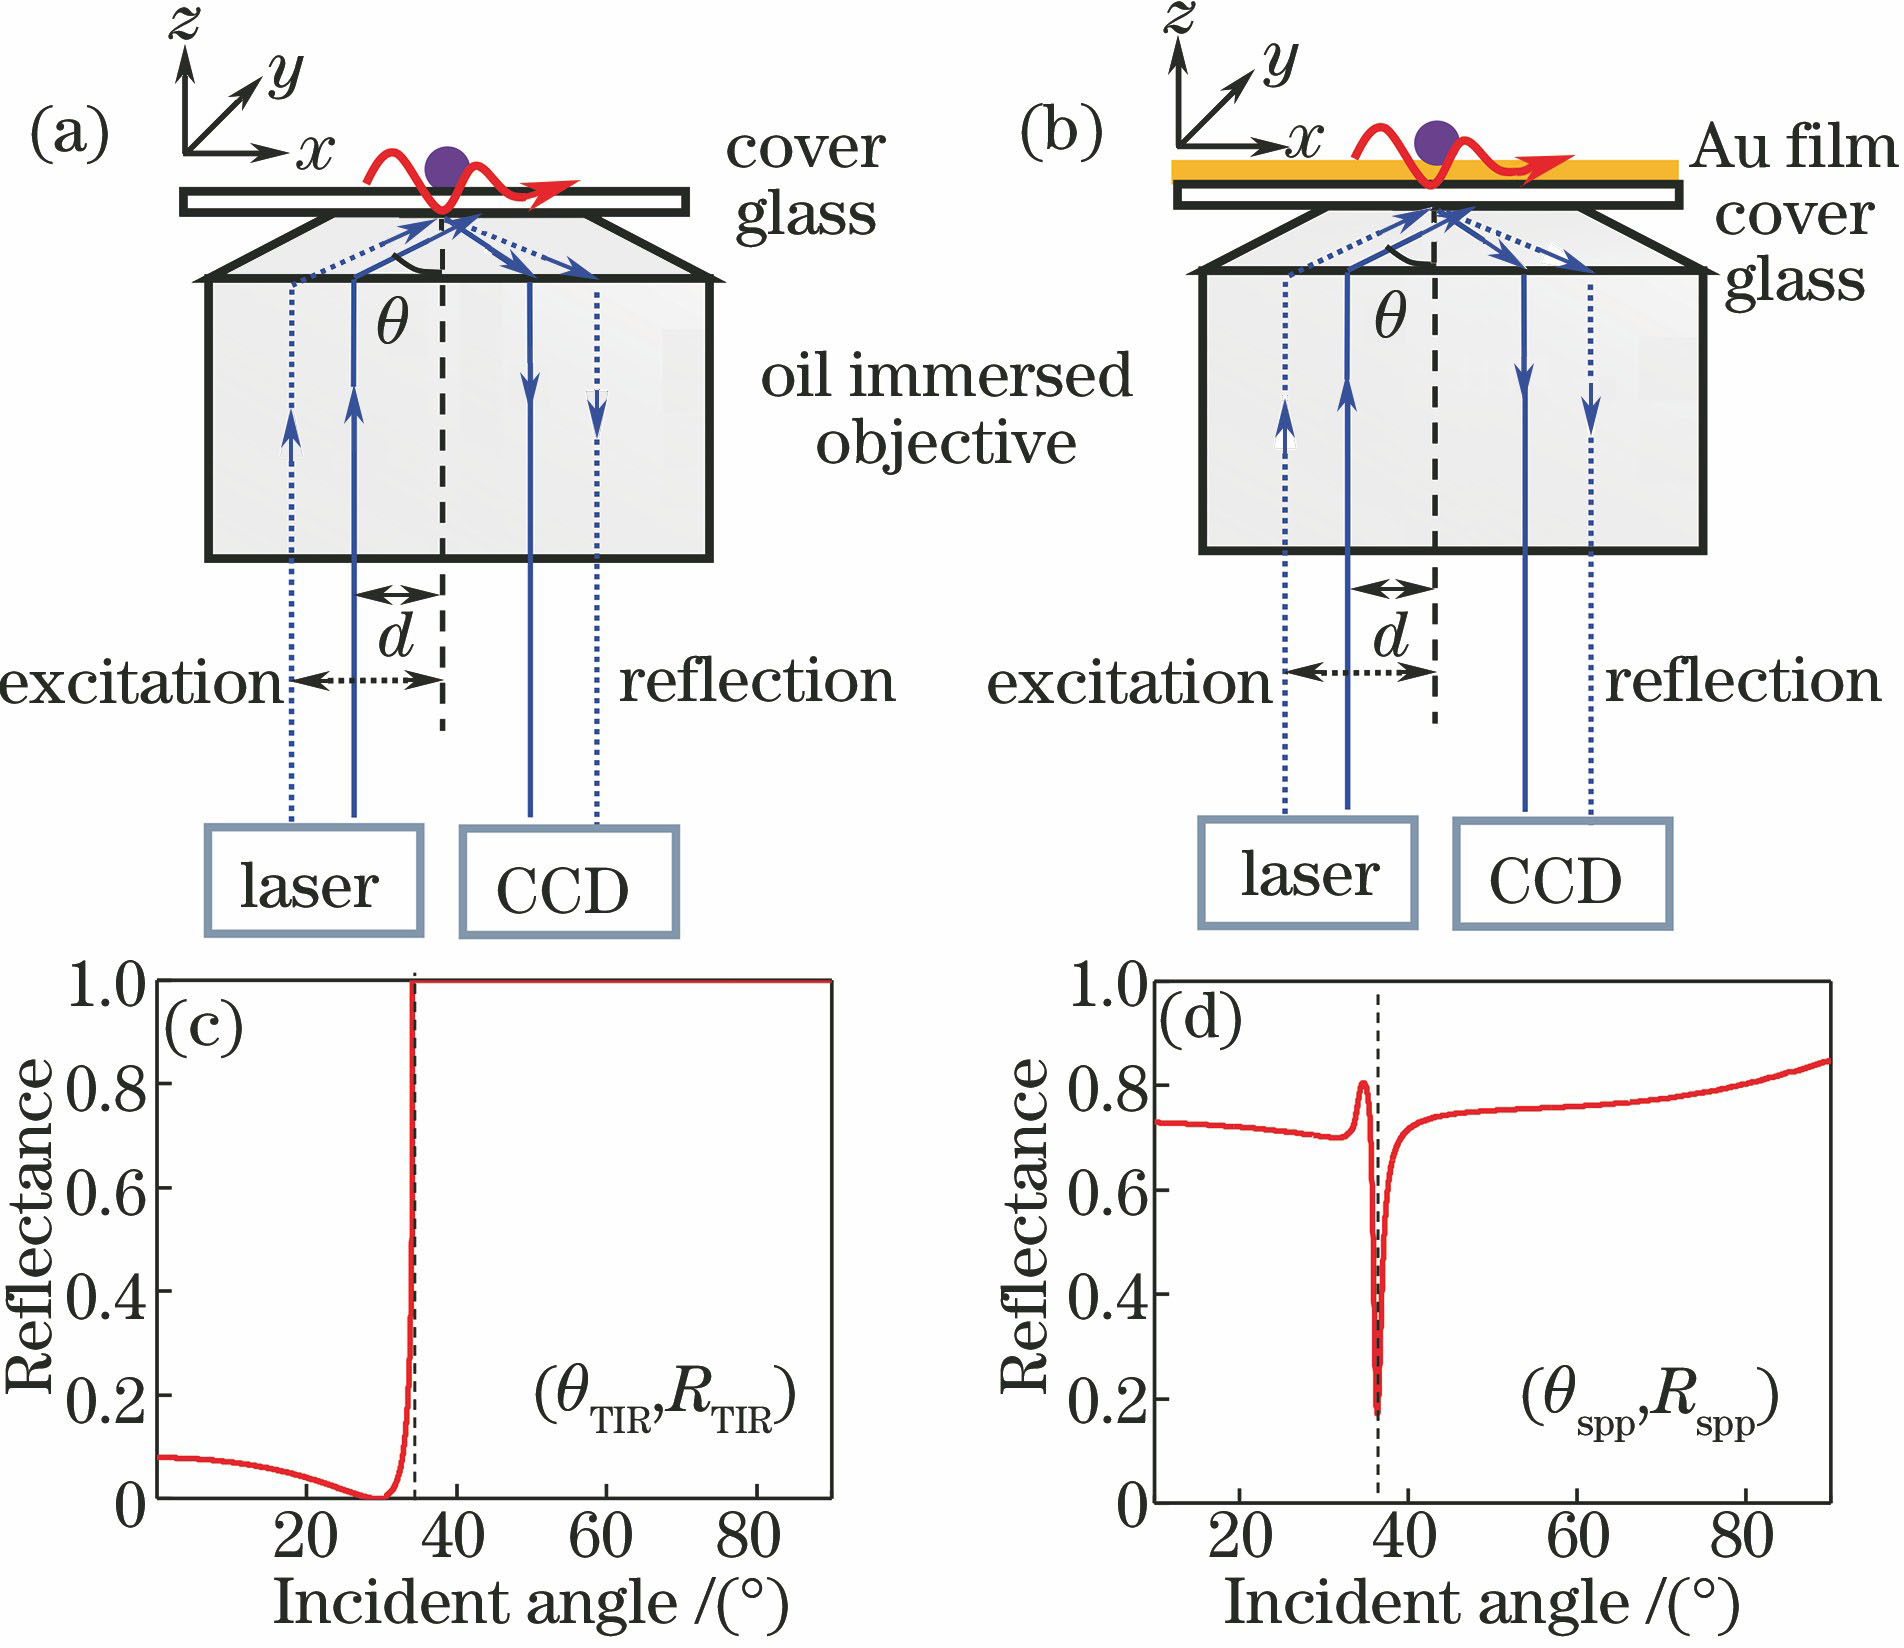 (a) Schematic of imaging setup based on TIR evanescent wave excitation; (b) schematic of imaging setup based on SPPs excitation; (c) variation of TIR reflectance with incident angle; (d) variation of SPPs reflectance with incident angle